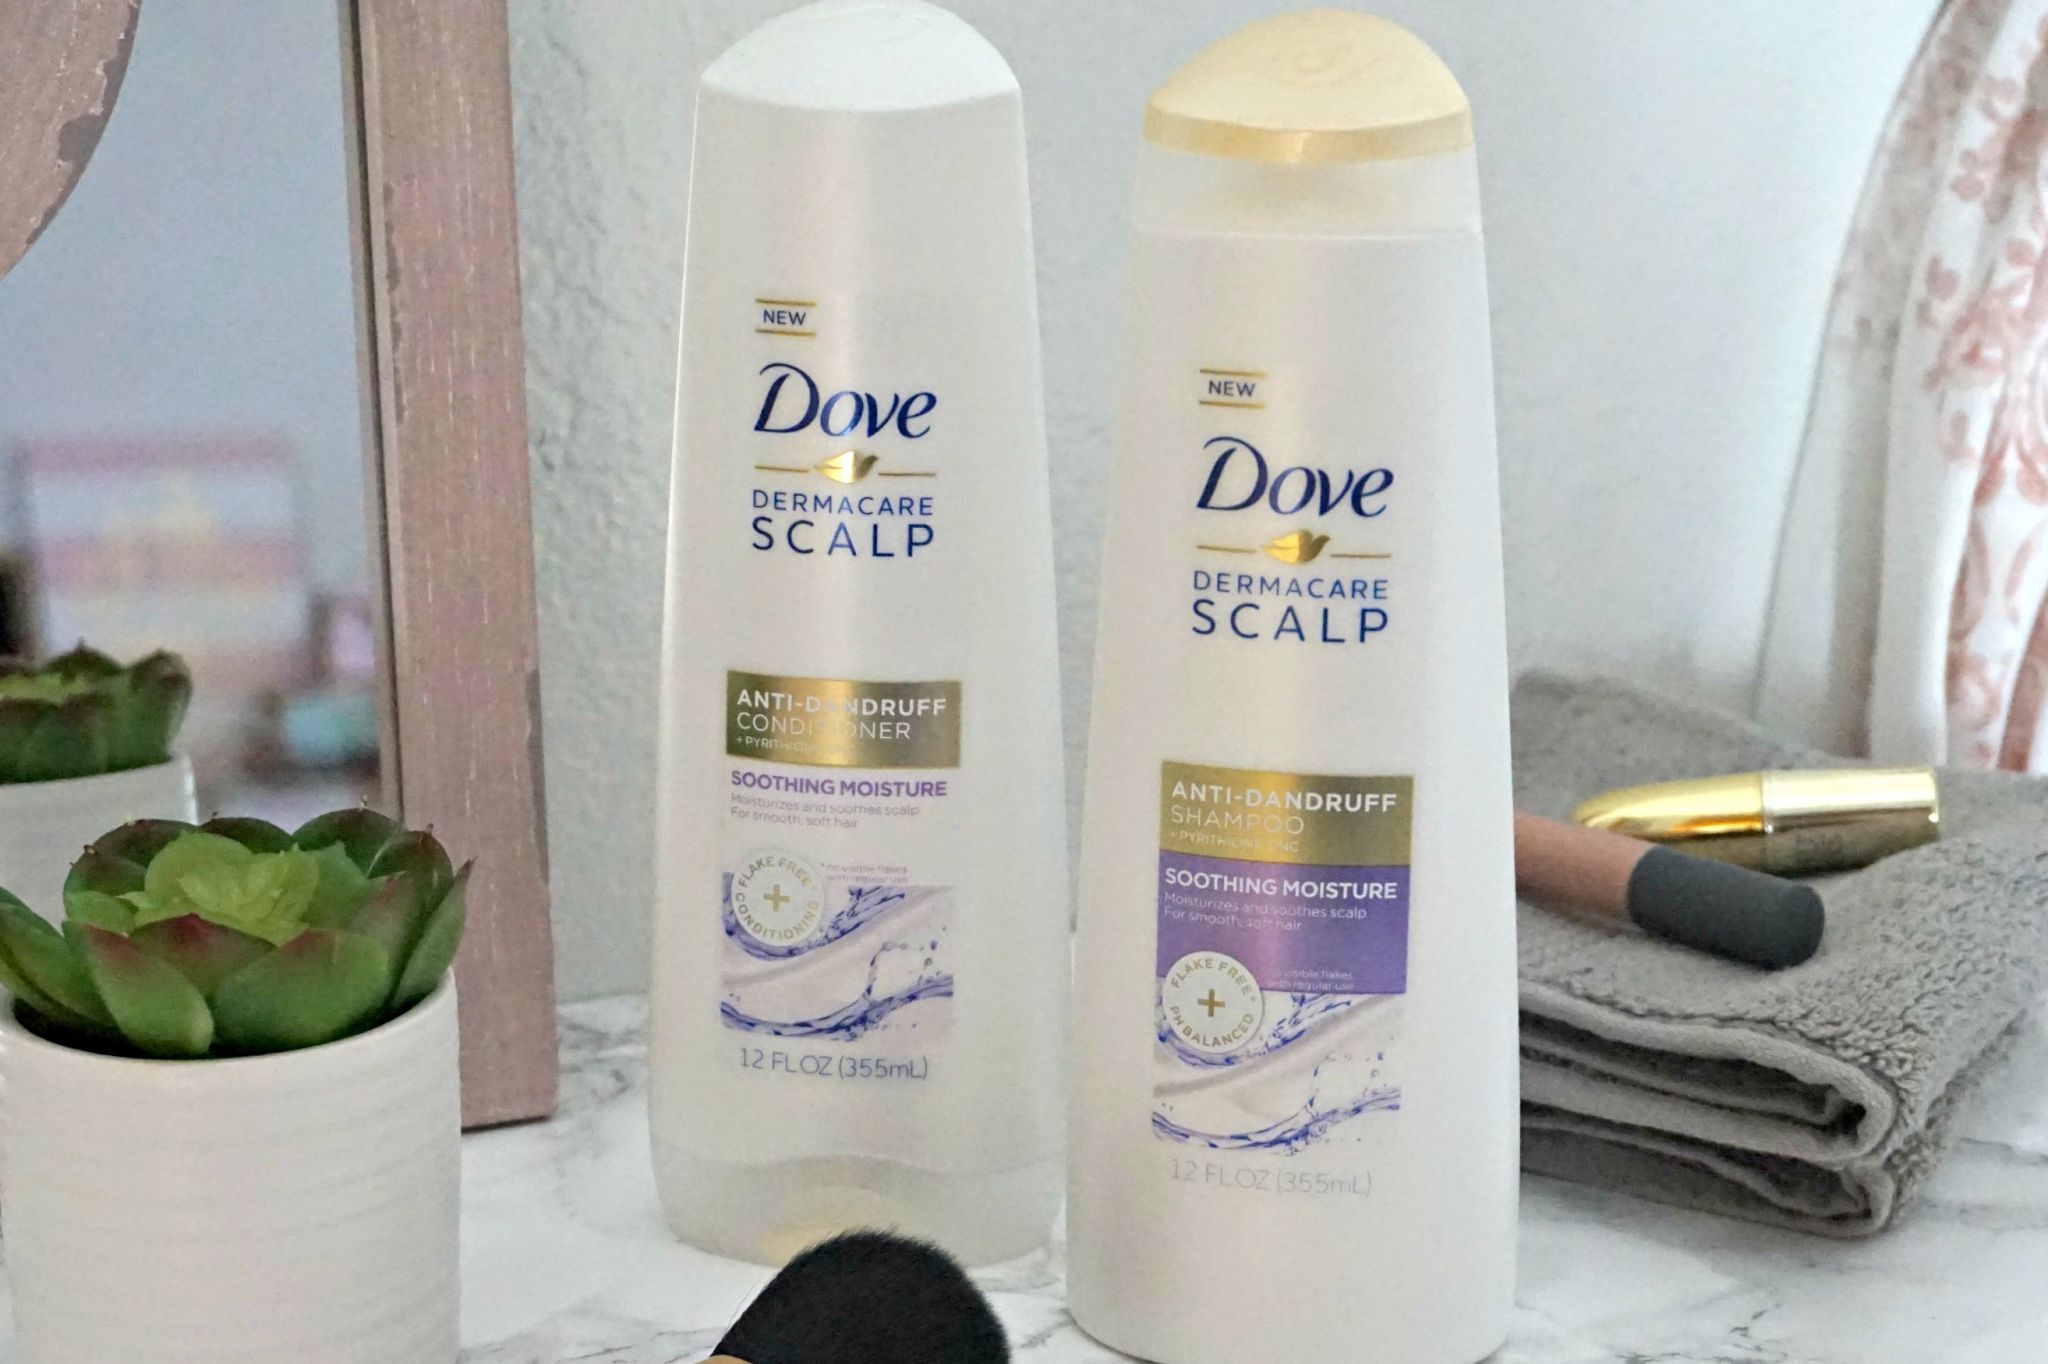 How To Maintain Healthy Hair // Hair Care Tips for Healthy Hair // How To Protect Your Hair | Beauty With Lily #ad #DiscoverDoveDerma 